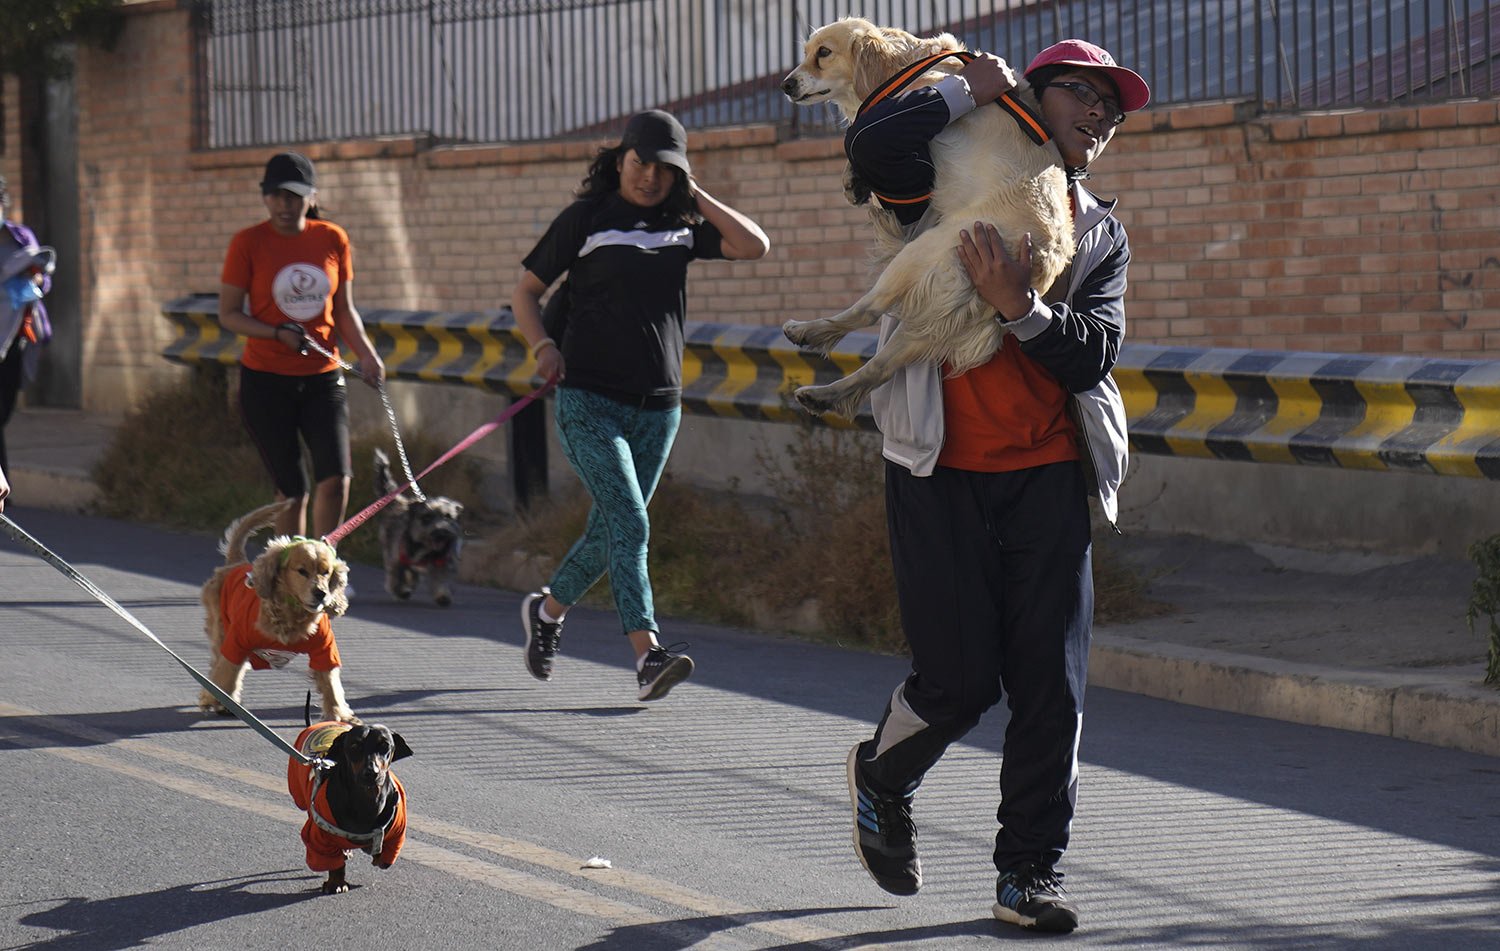  Pet owners take part in a dog-a-thon, in La Paz, Bolivia, Sunday, June 19, 2022. Bolivian police hosted a Perroton or dog-a-thon as part of the National Police Month events promoting the prevention of cruelty to animals. (AP Photo/Juan Karita) 